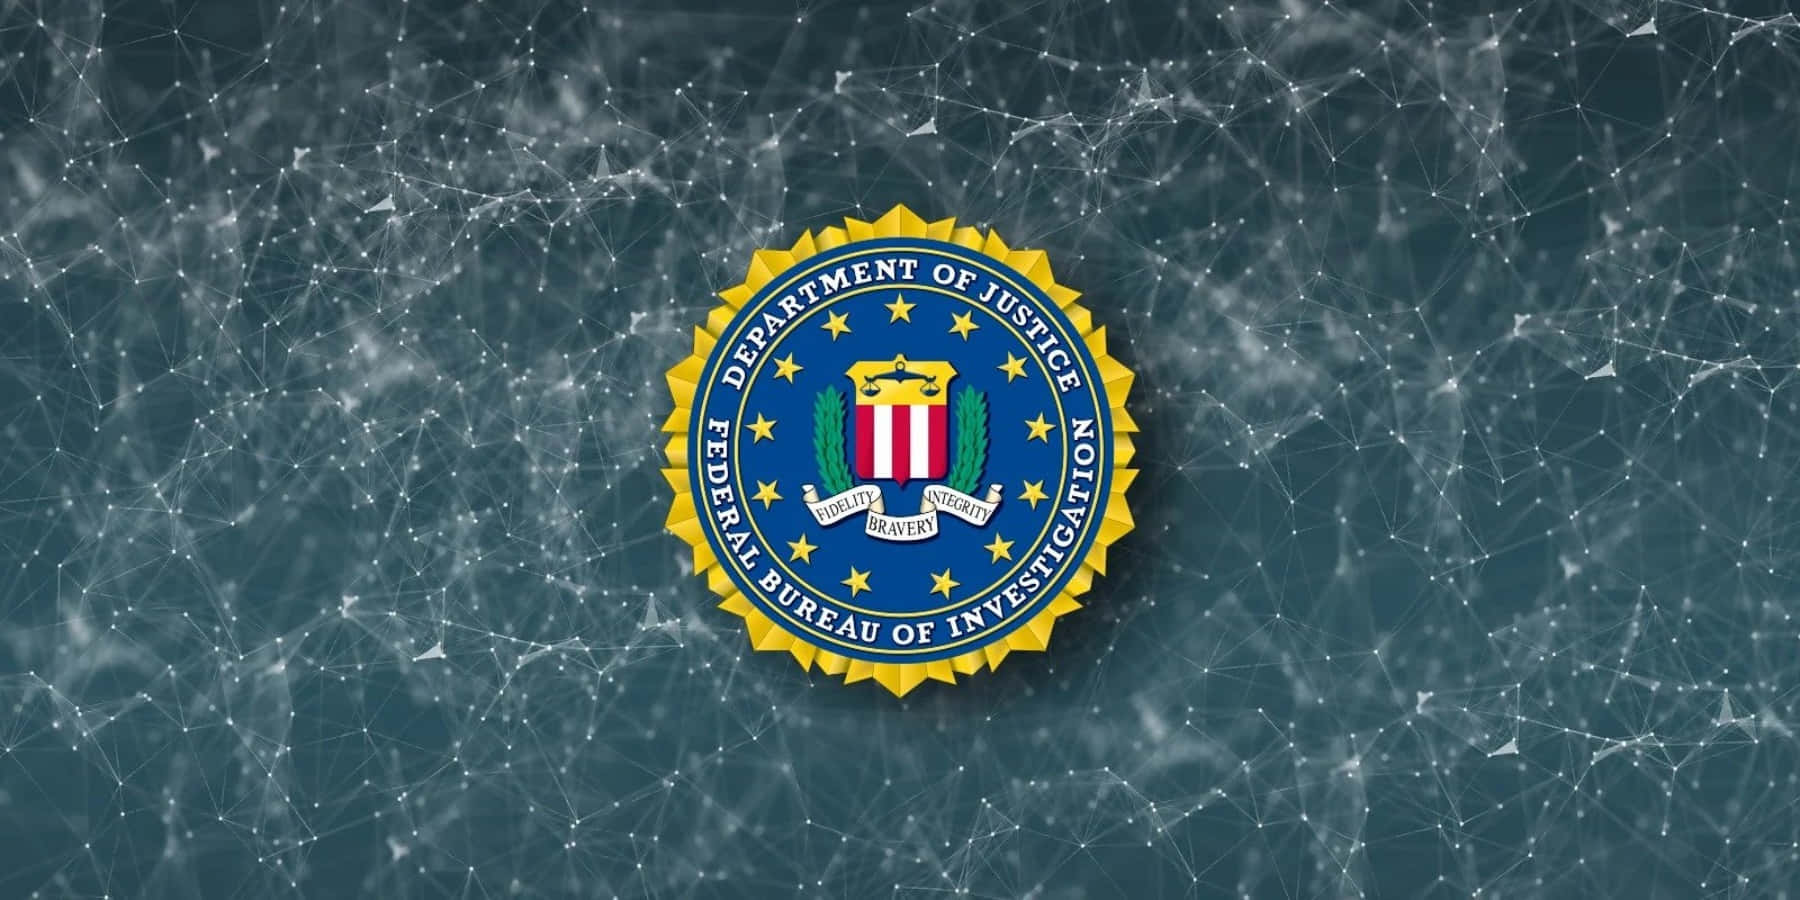 The Fbi Logo Is Shown On A Background Of A Blue Background